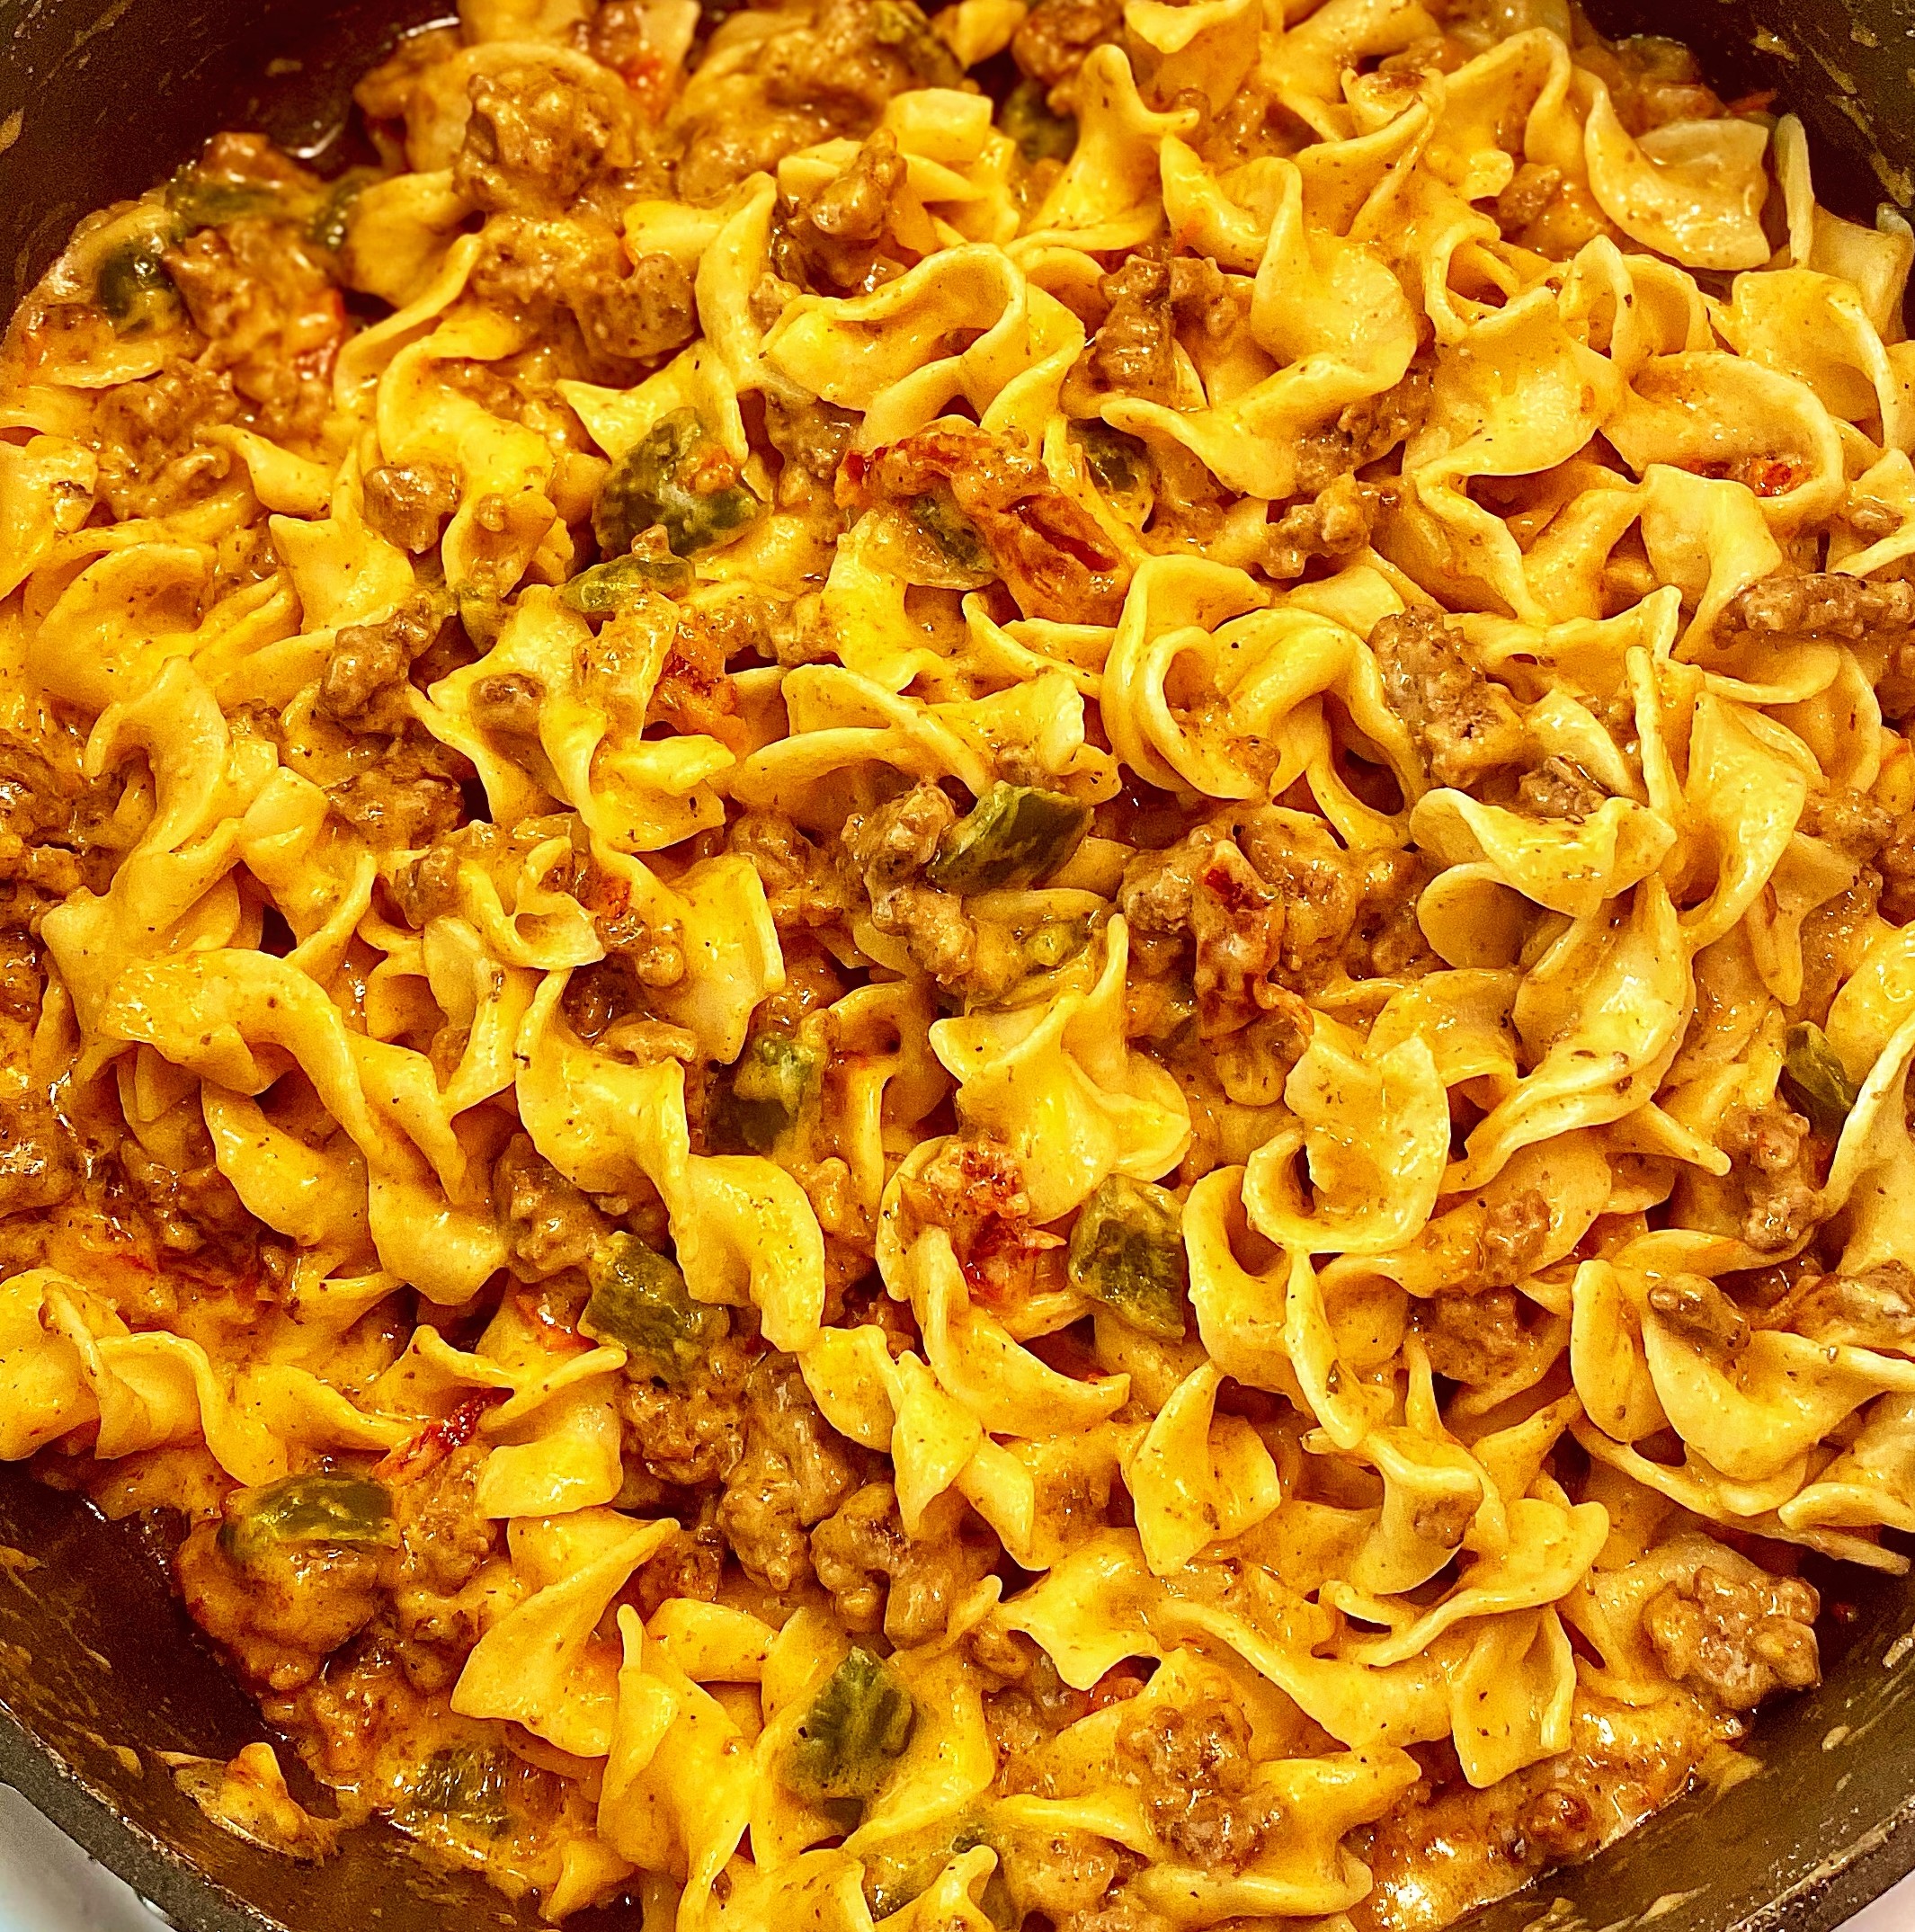 Grandma's Beef and Noodle Casserole image